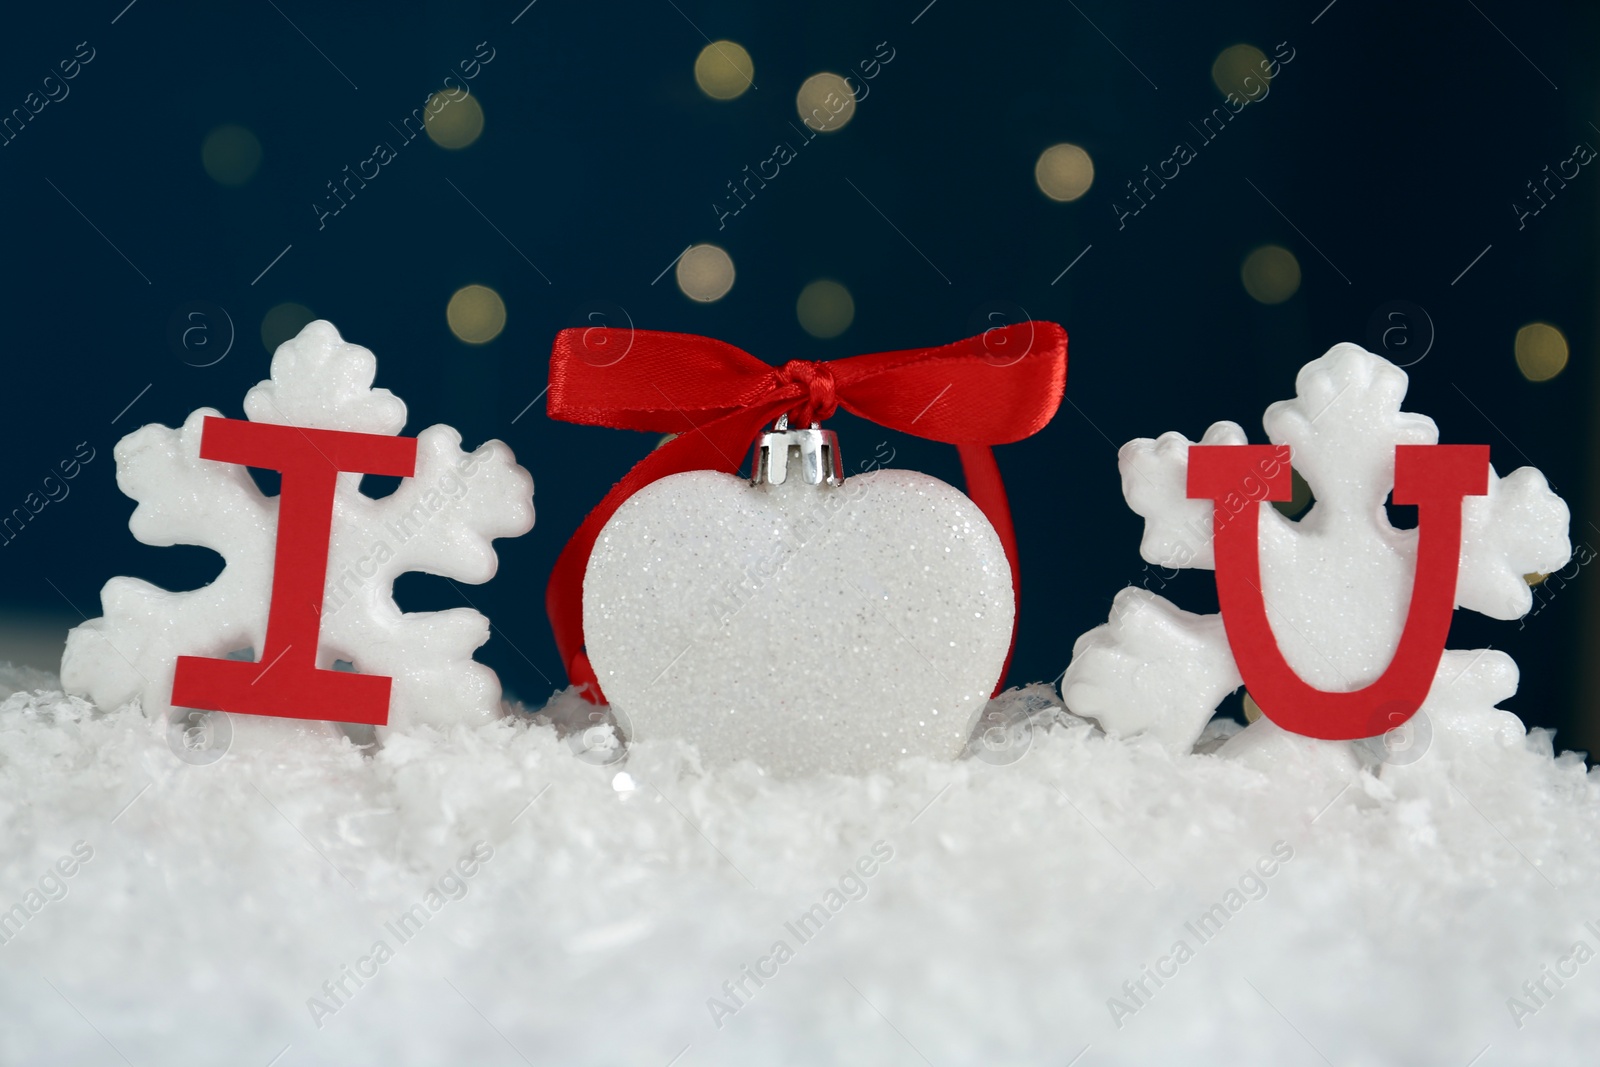 Photo of Phrase I Love You made of paper letters and festive heart shaped ornament on snow against blue background